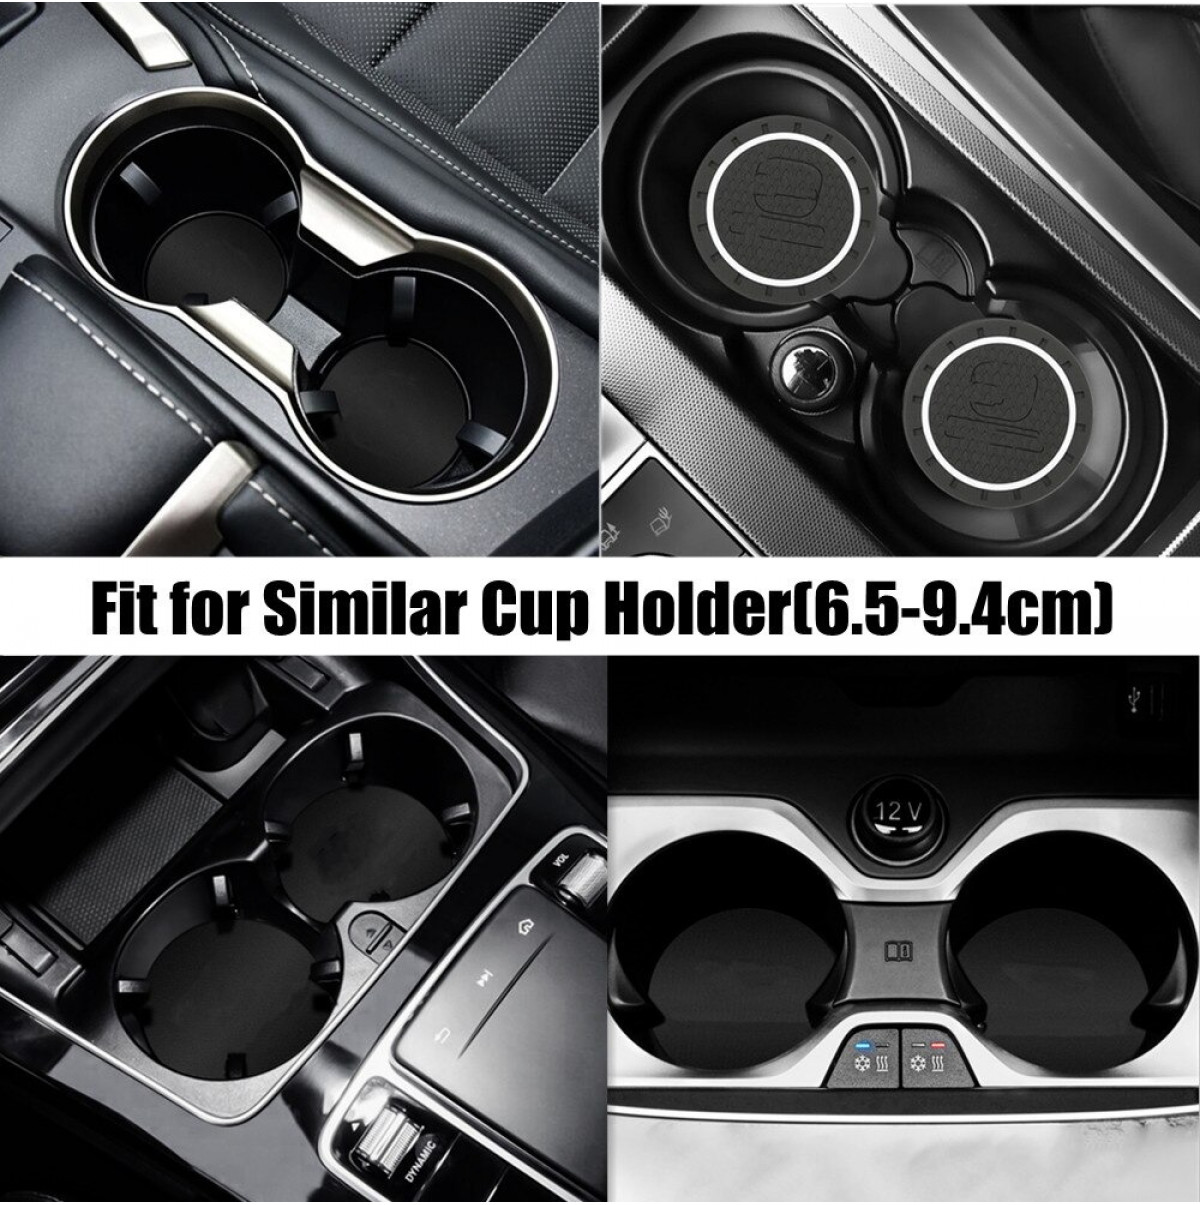 Androf Universal Car Cup Holder